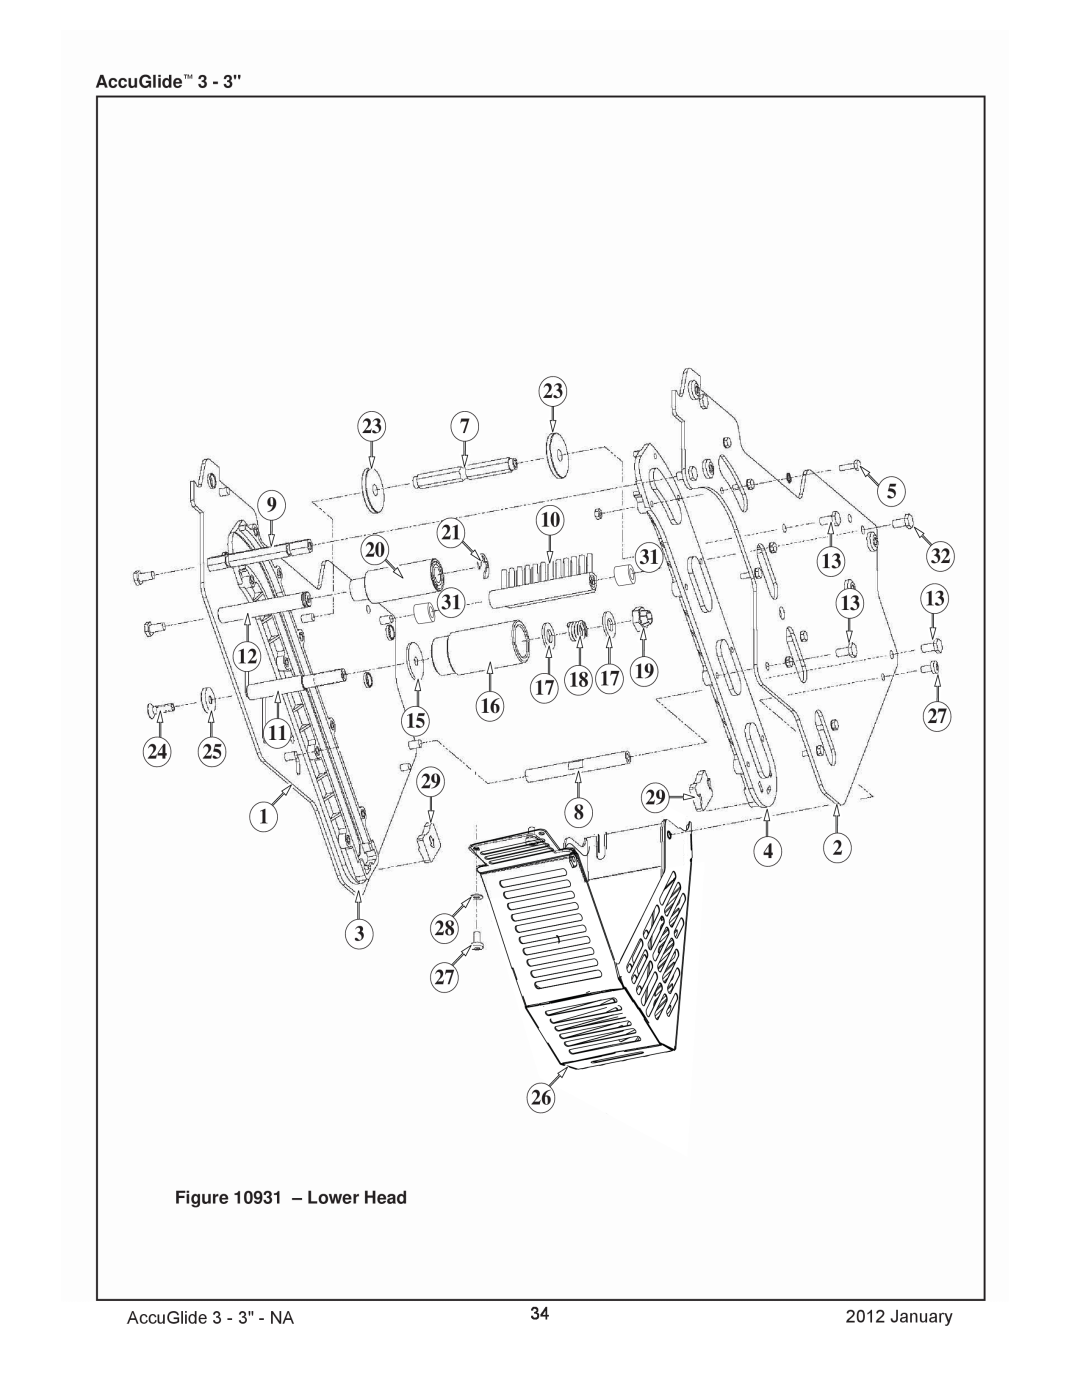 3M 40800 operating instructions Lower Head, AccuGlide 3 - 3 - NA, January 